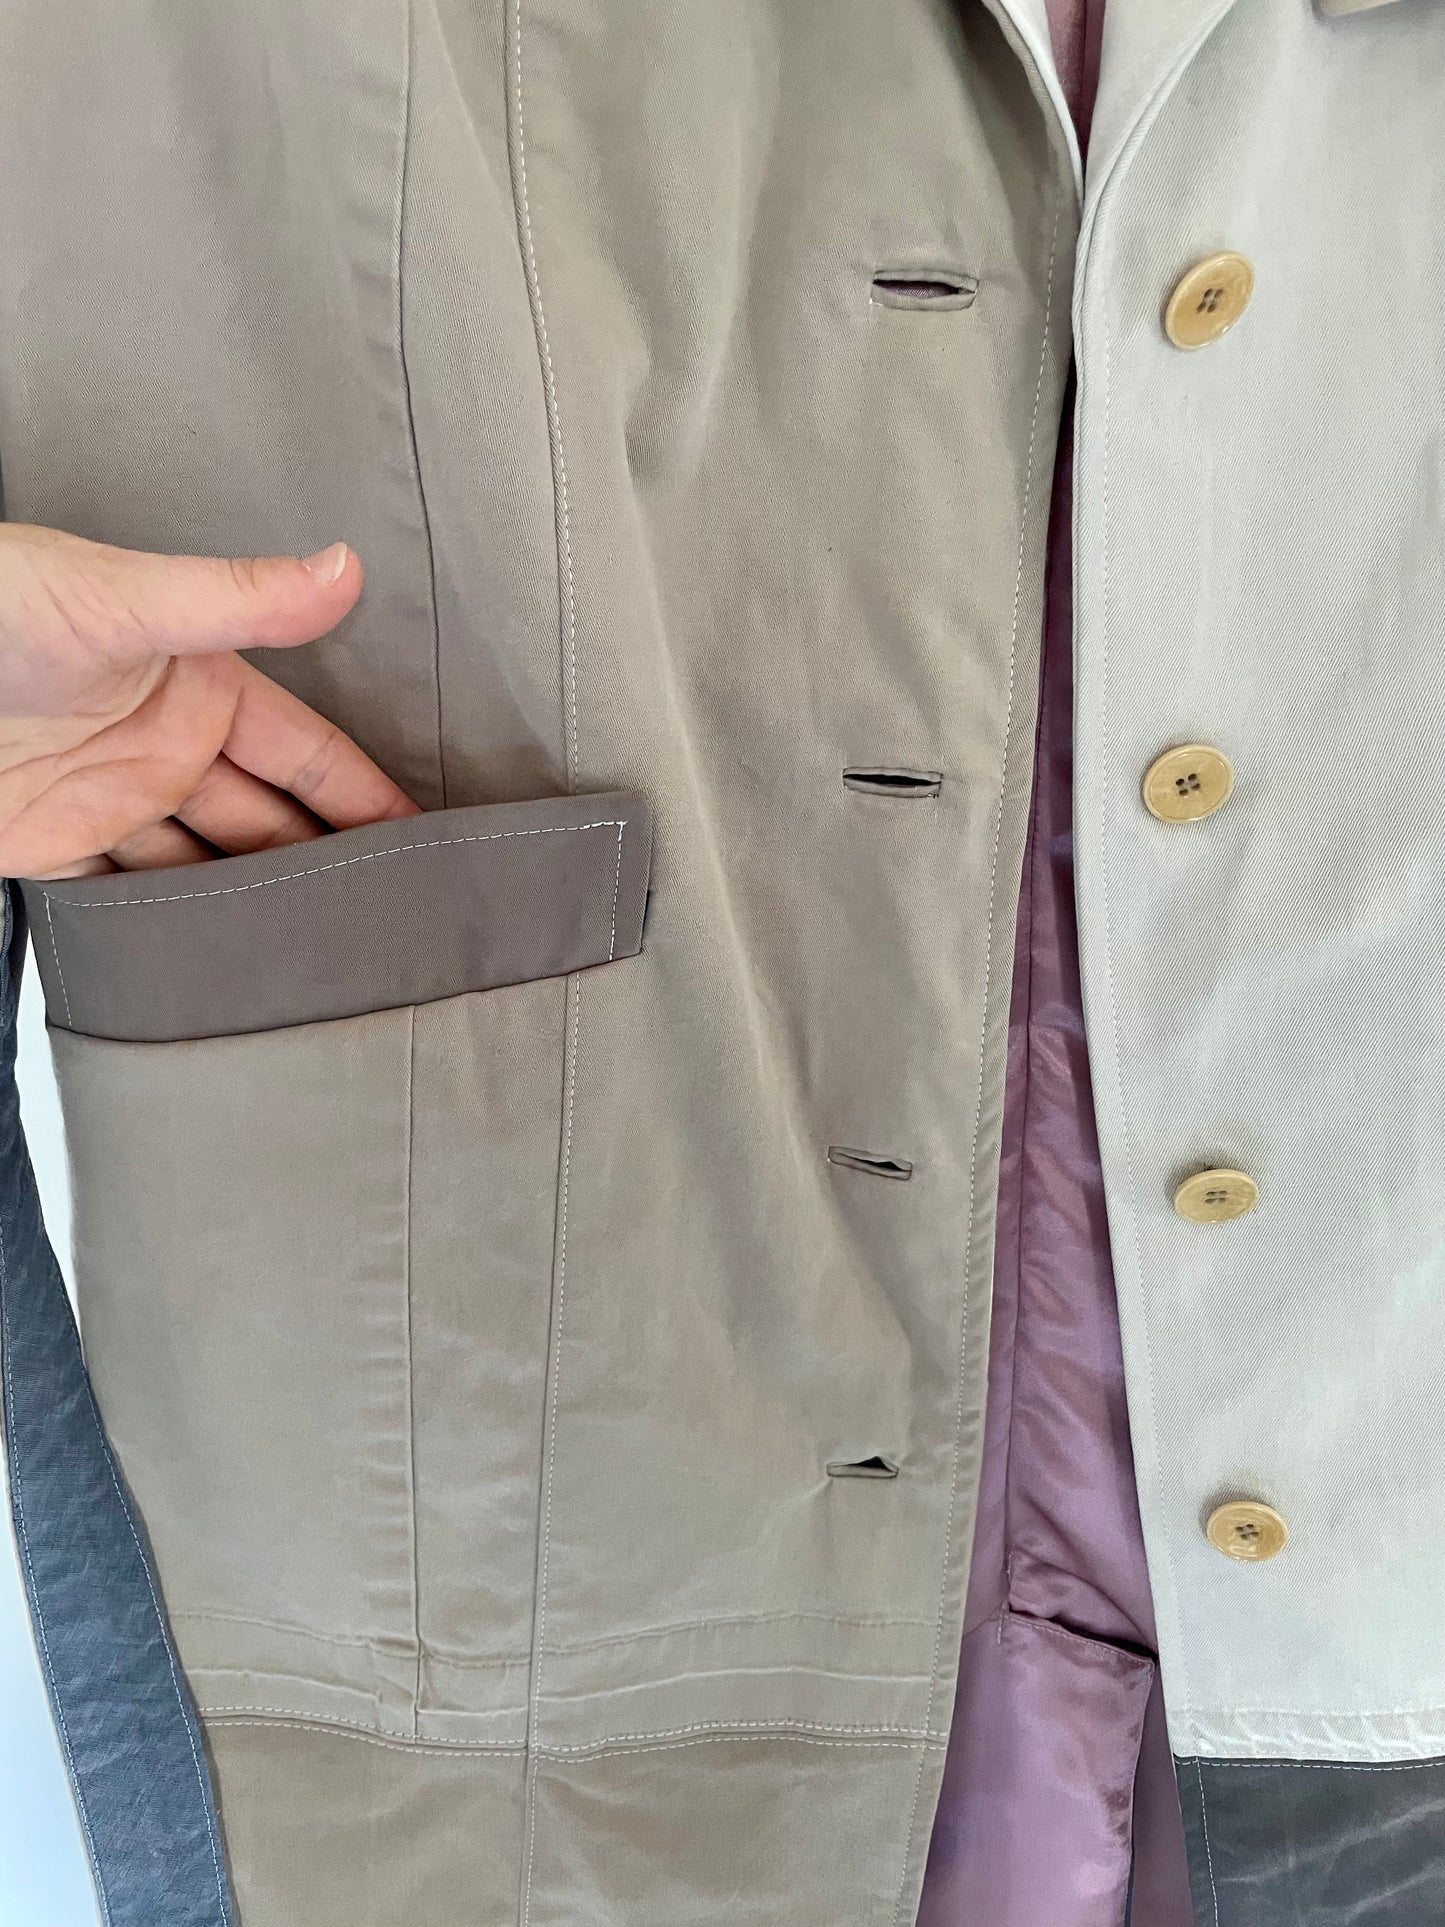 A Chinos trench coat